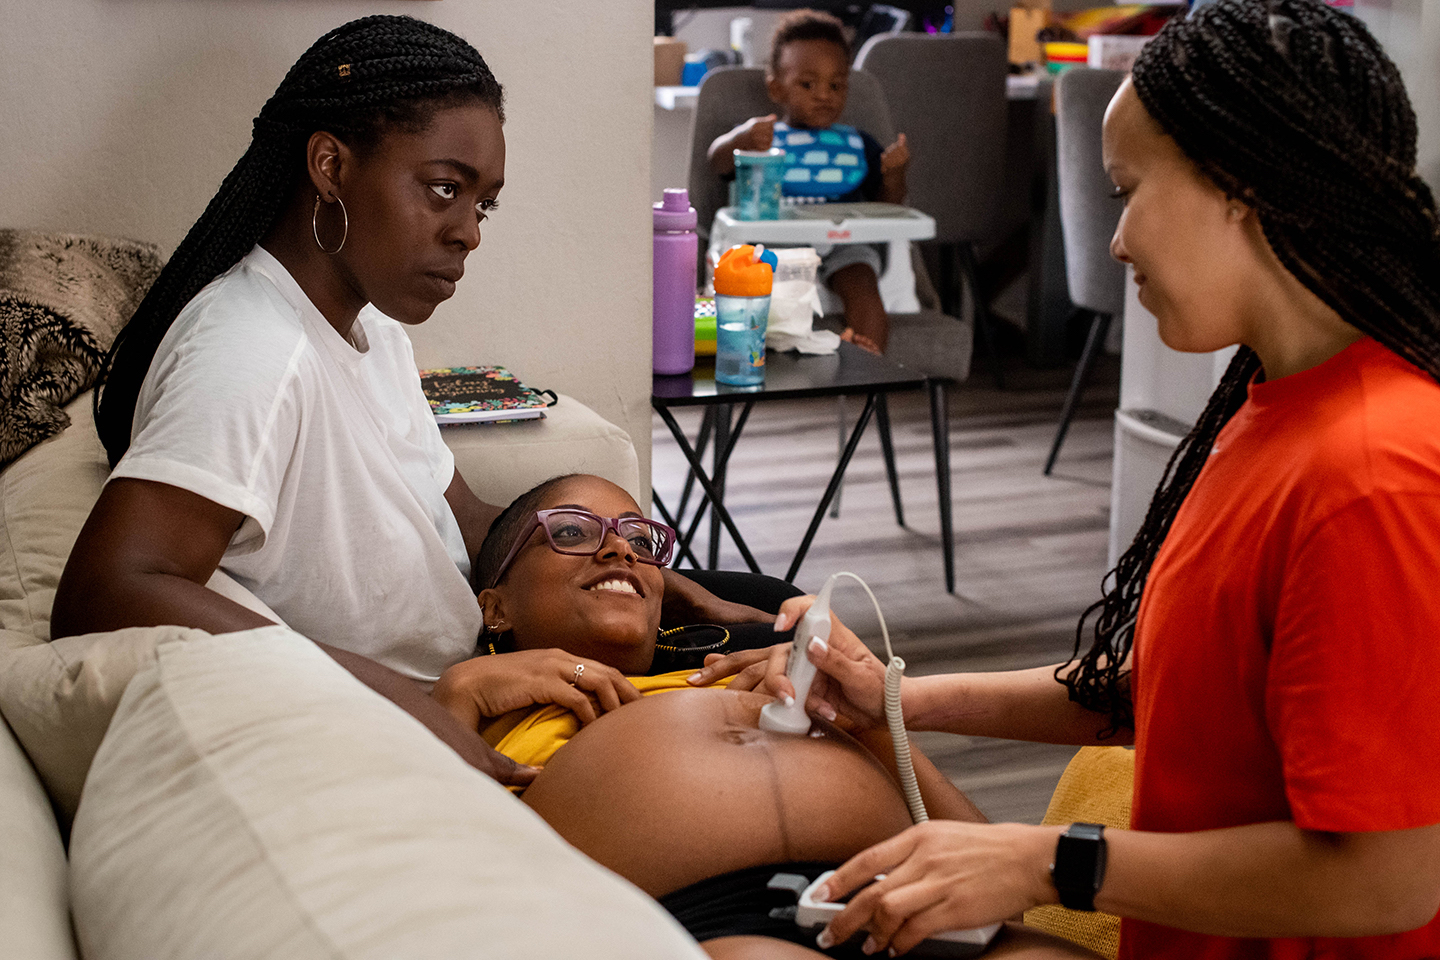 a pregnant woman is being attended to by two other women, one of whom is using a monitoring device on the pregnant woman's belly